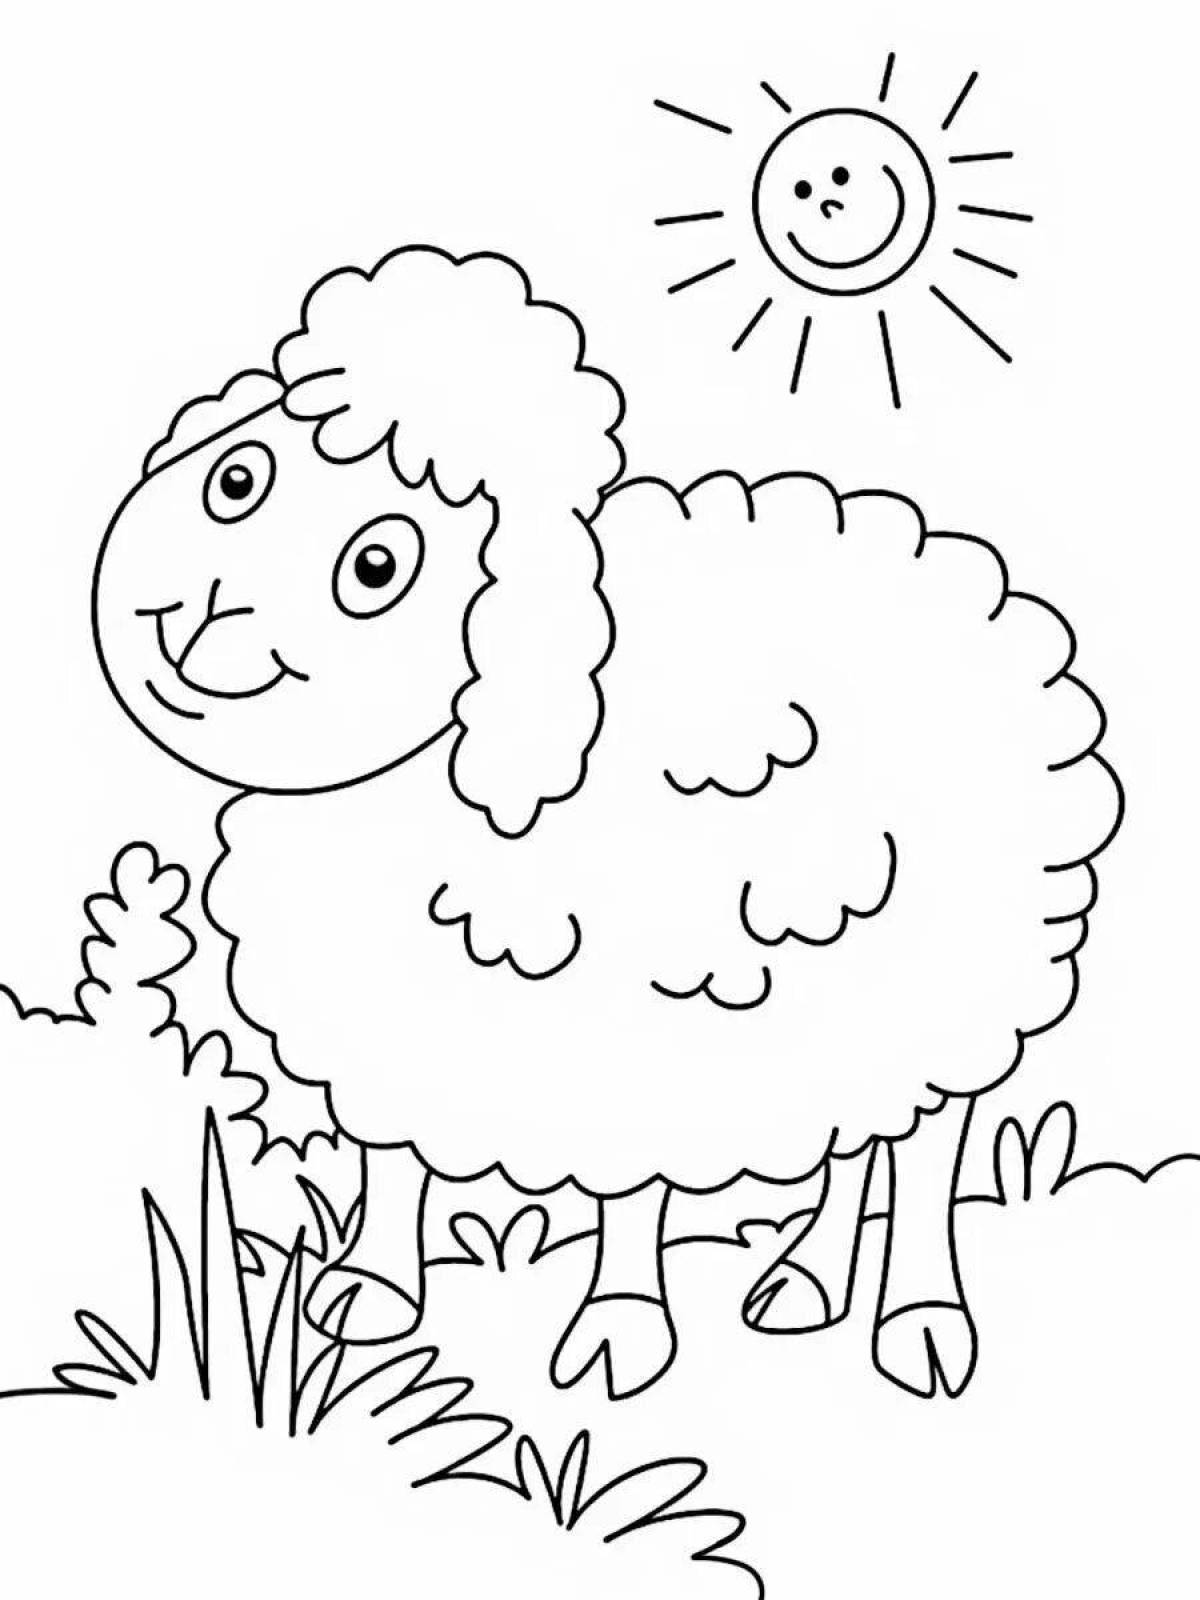 Magic sheep coloring book for kids 5-6 years old